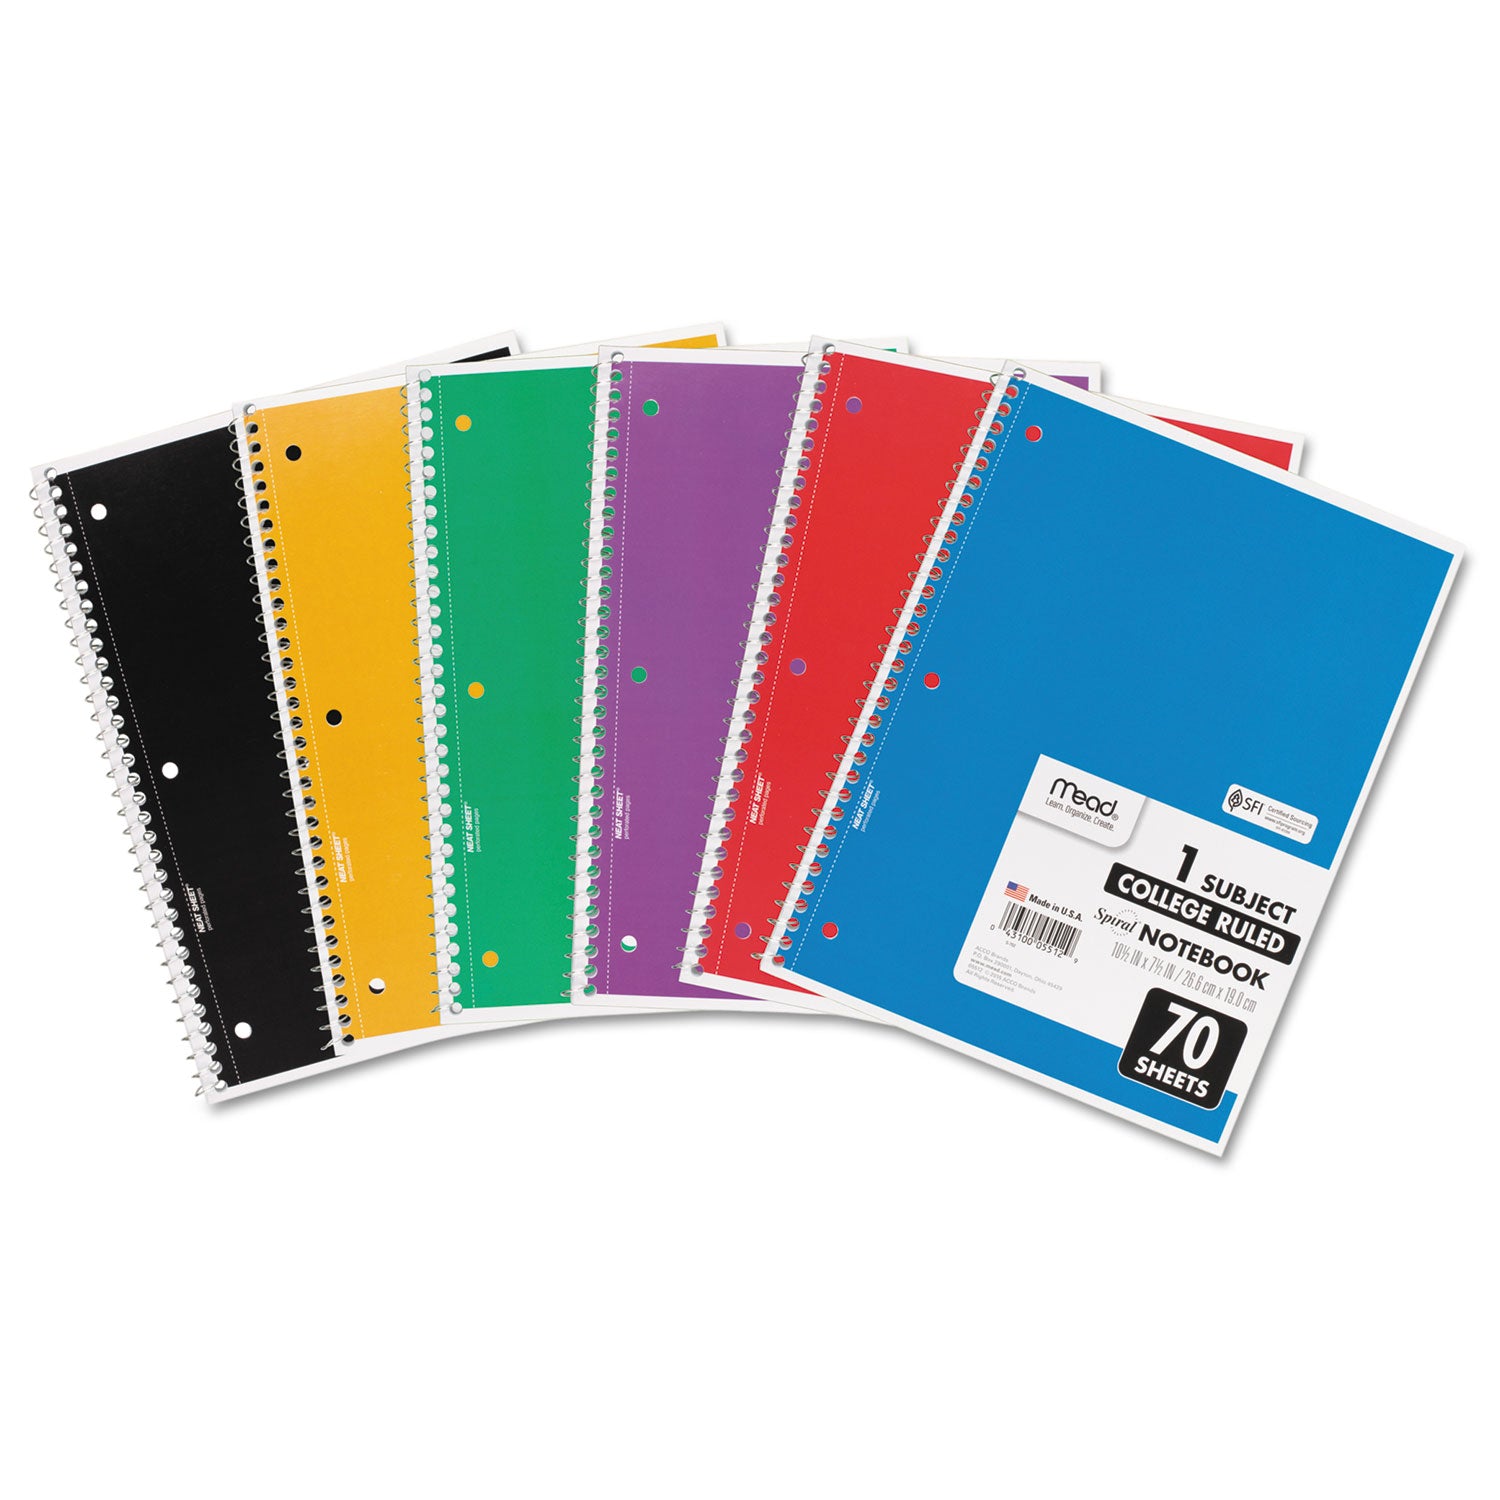 Spiral Notebook, 3-Hole Punched, 1-Subject, Medium/College Rule, Randomly Assorted Cover Color, (70) 10.5 x 7.5 Sheets - 